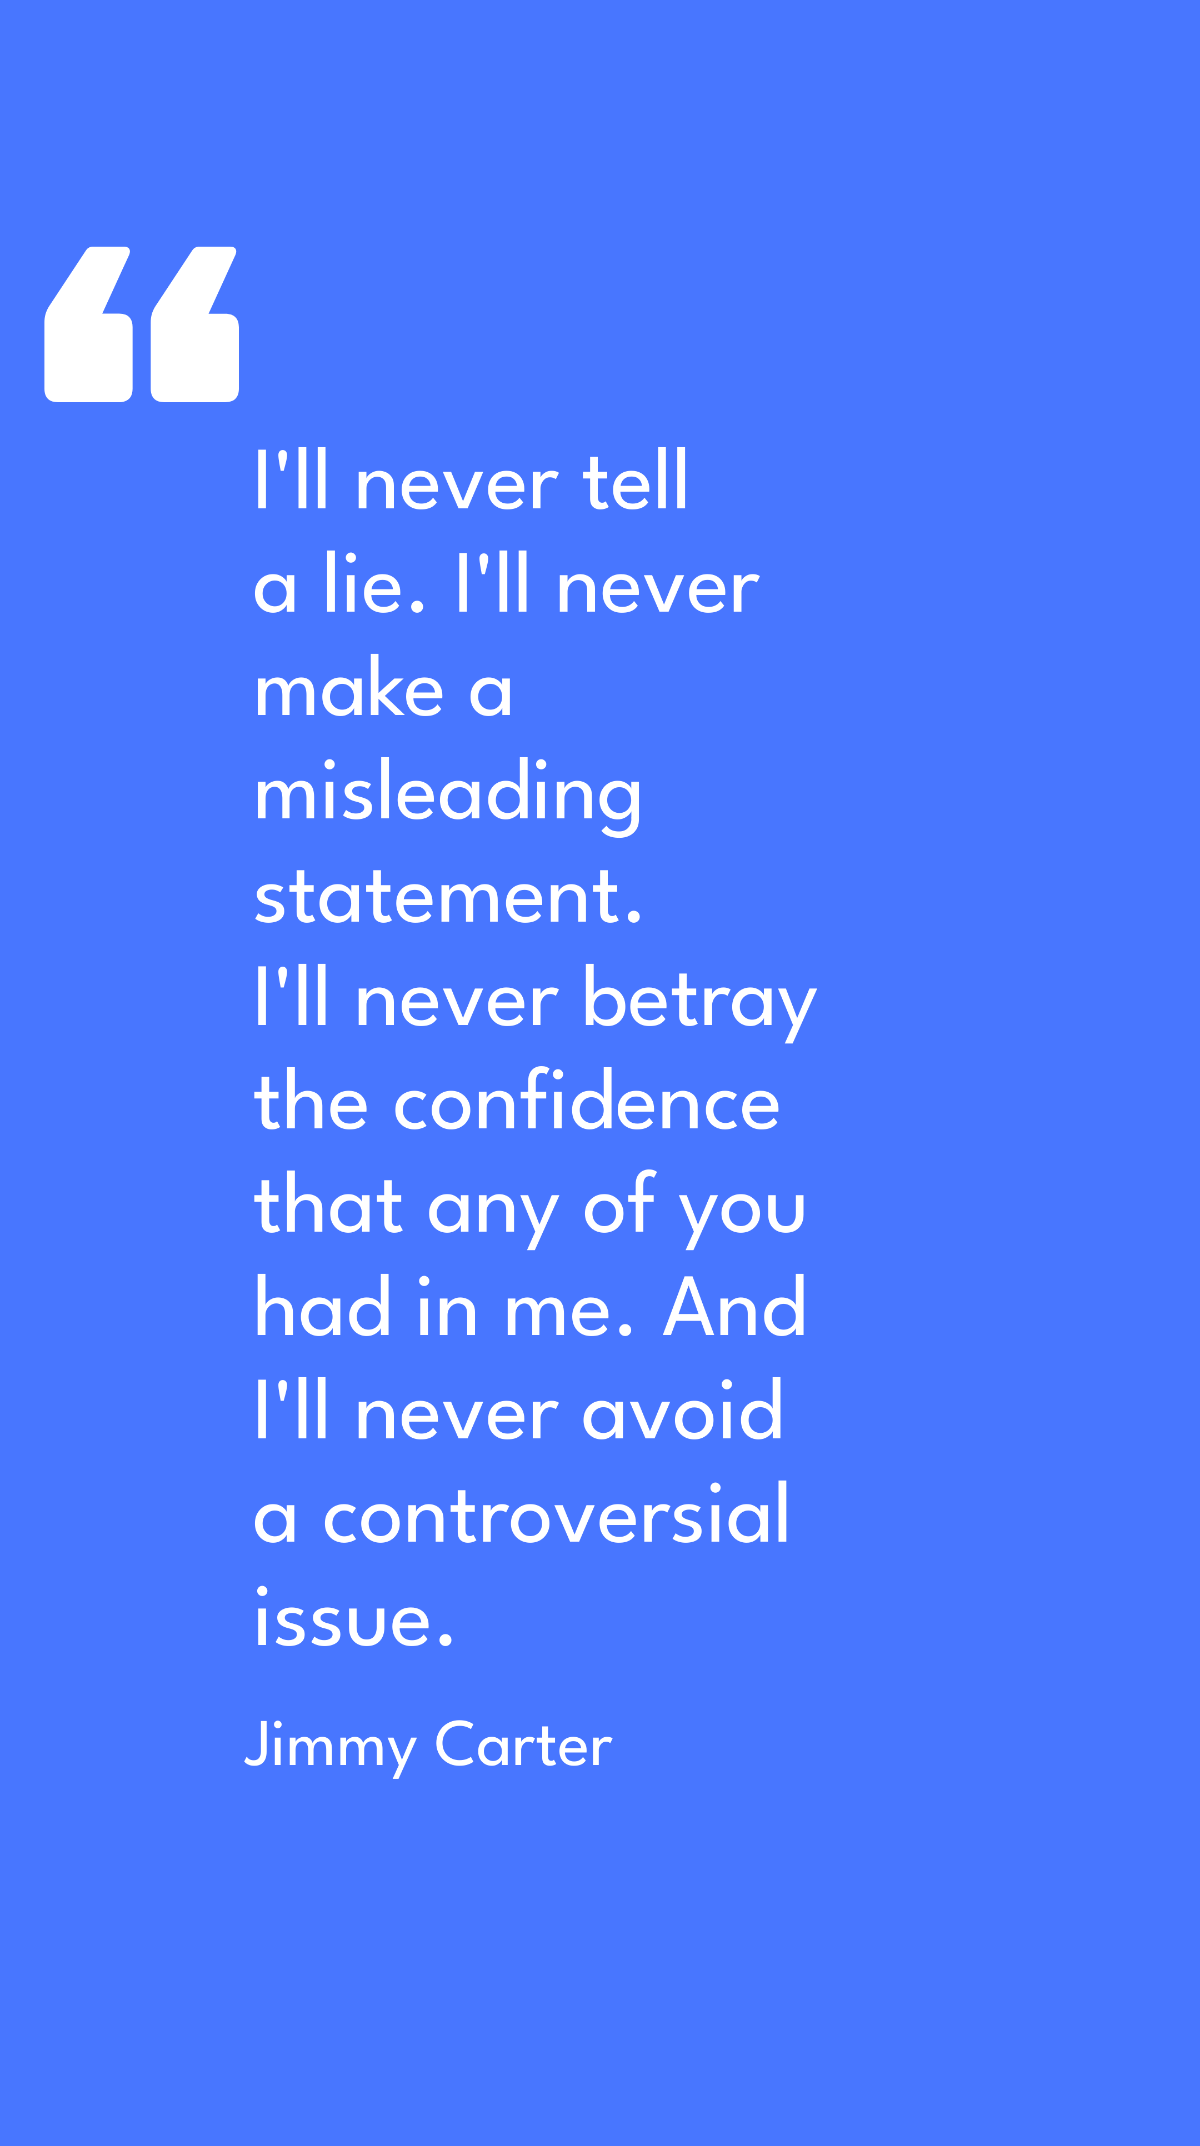 Jimmy Carter - I'll never tell a lie. I'll never make a misleading statement. I'll never betray the confidence that any of you had in me. And I'll never avoid a controversial issue.